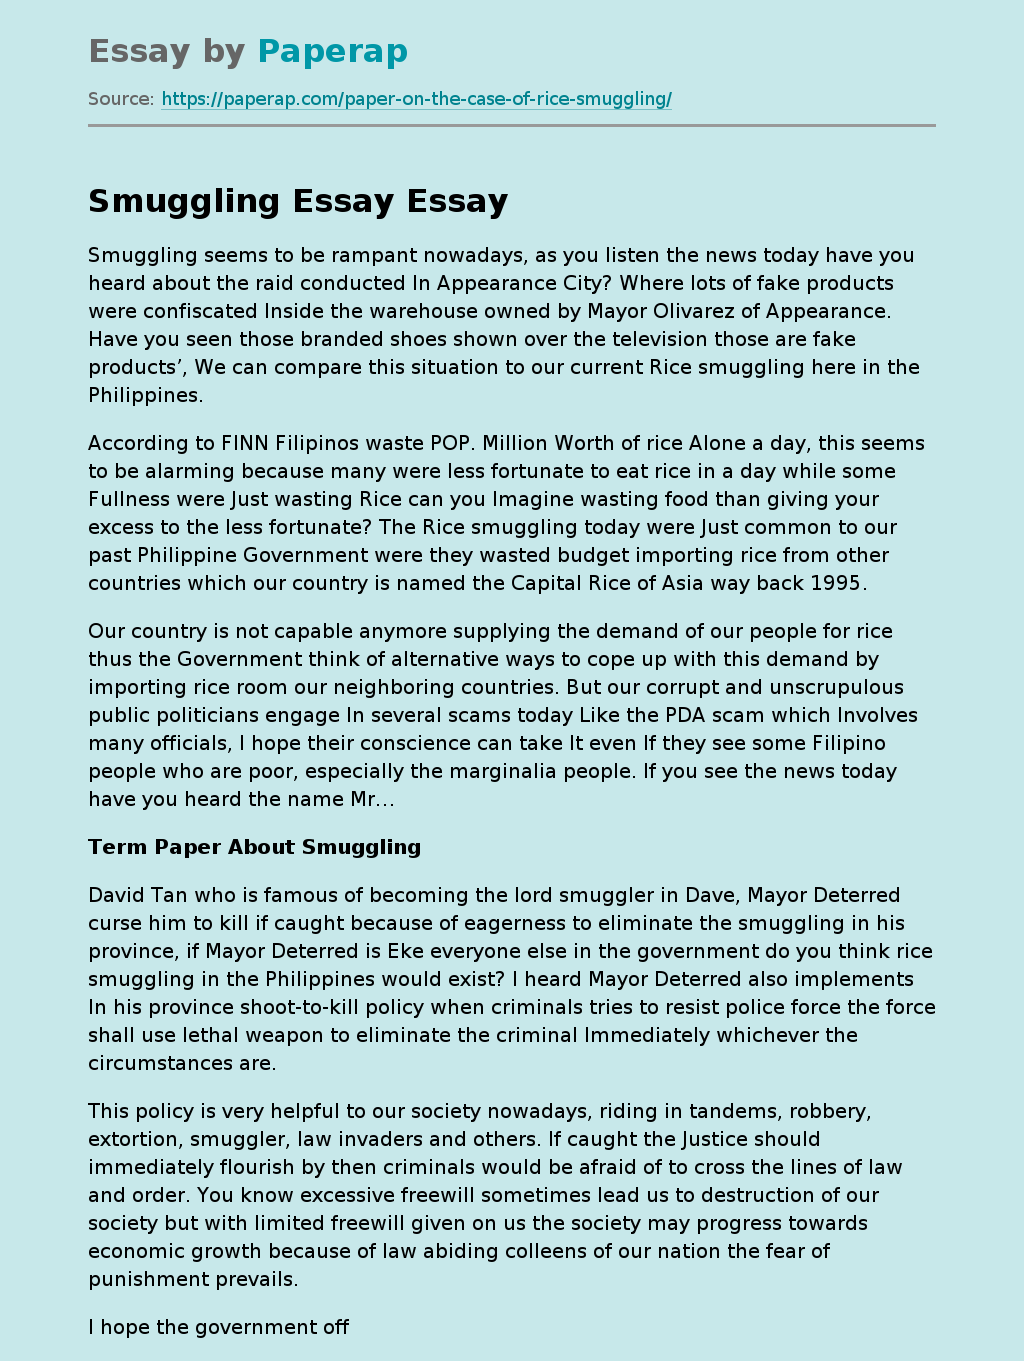 essay on smuggling with quotations